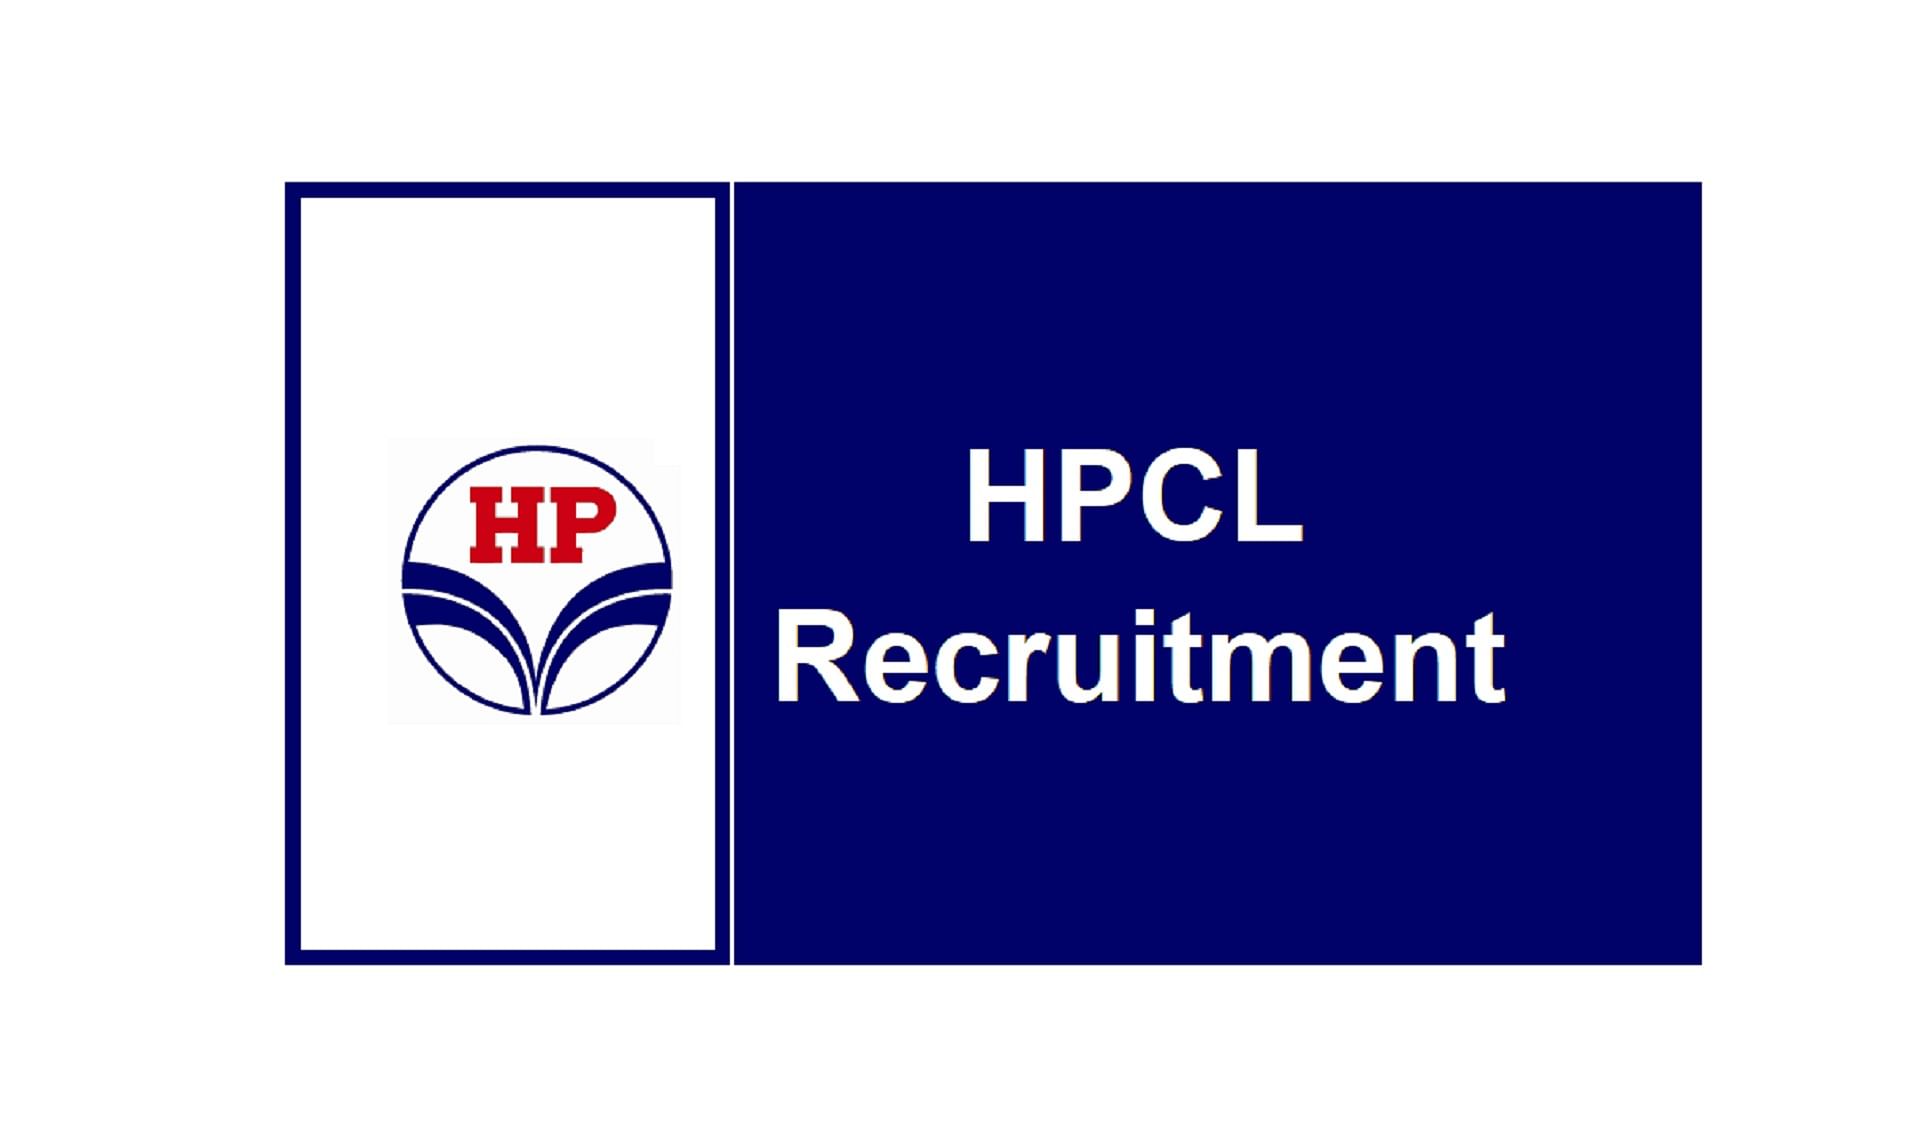 HPCL Recruitment 2022: Government Job Offer Over 186 Technician Posts, Check Eligibility Details Here